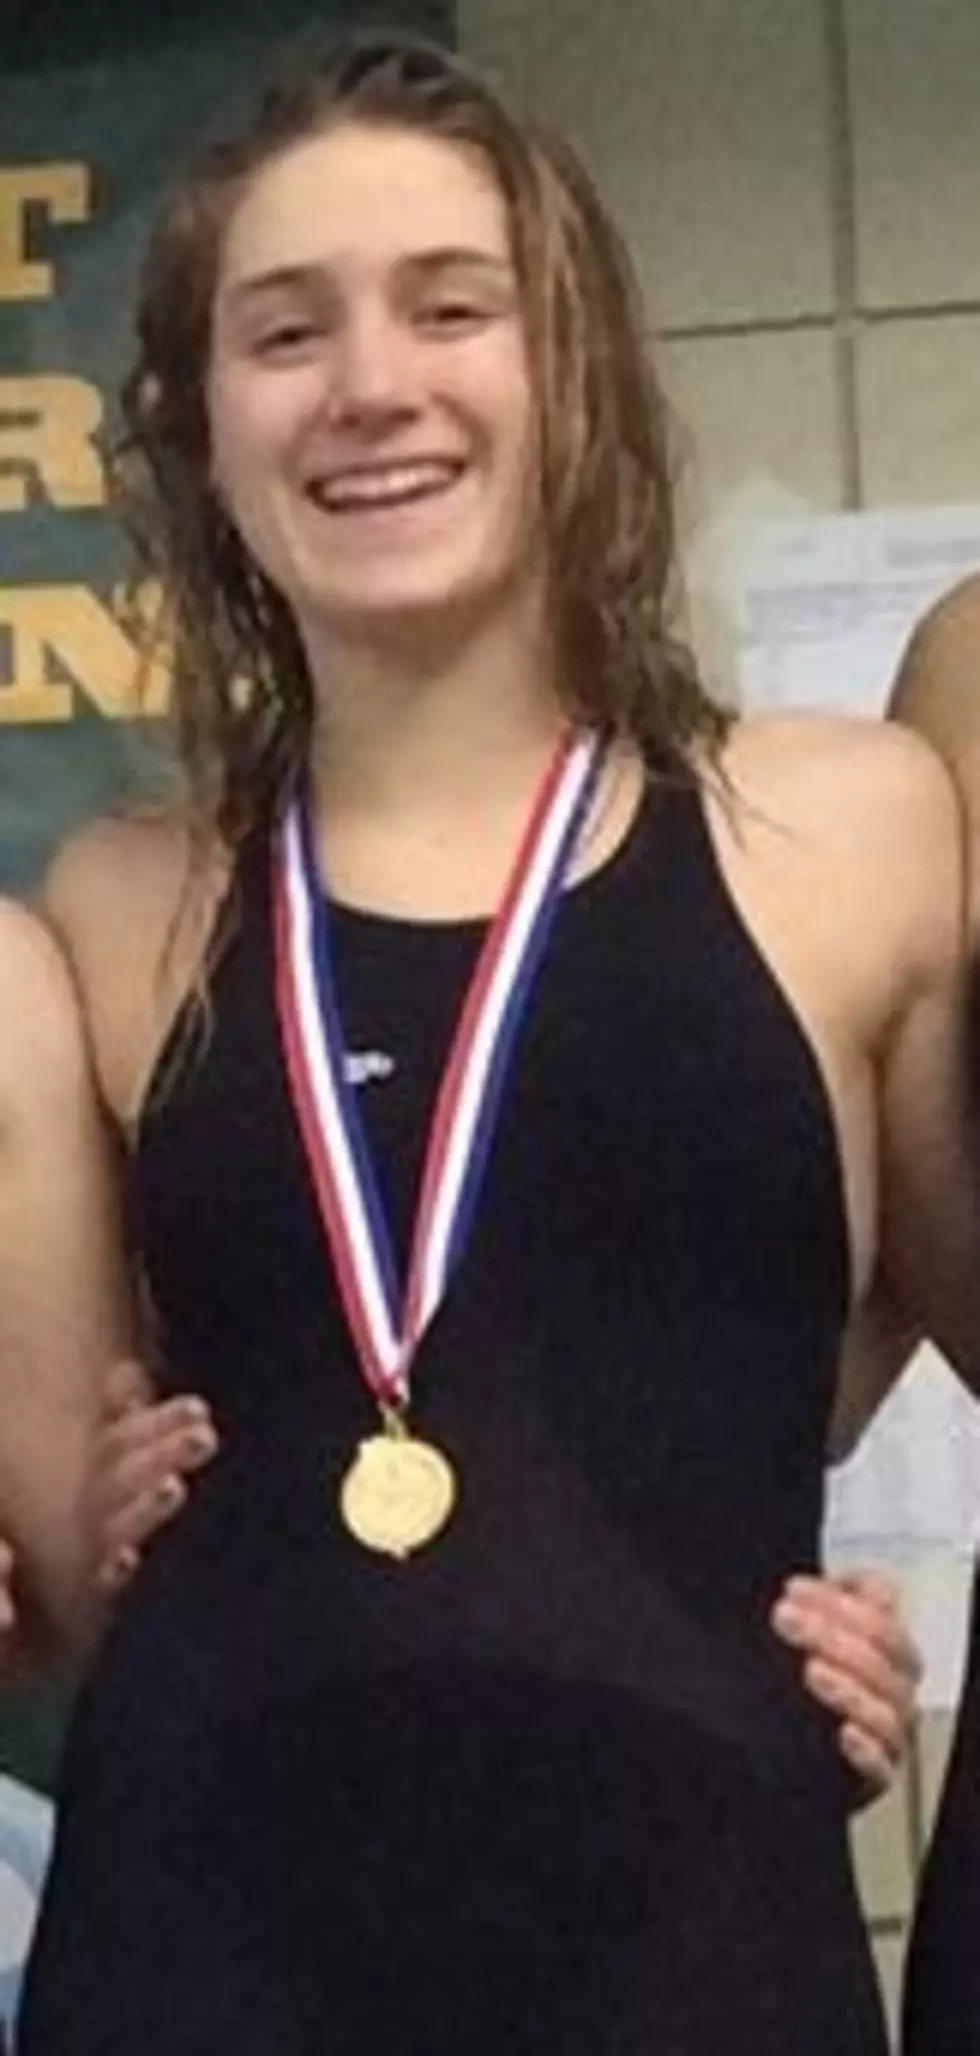 MDI Swimmer Wins Athlete of the Week Voting